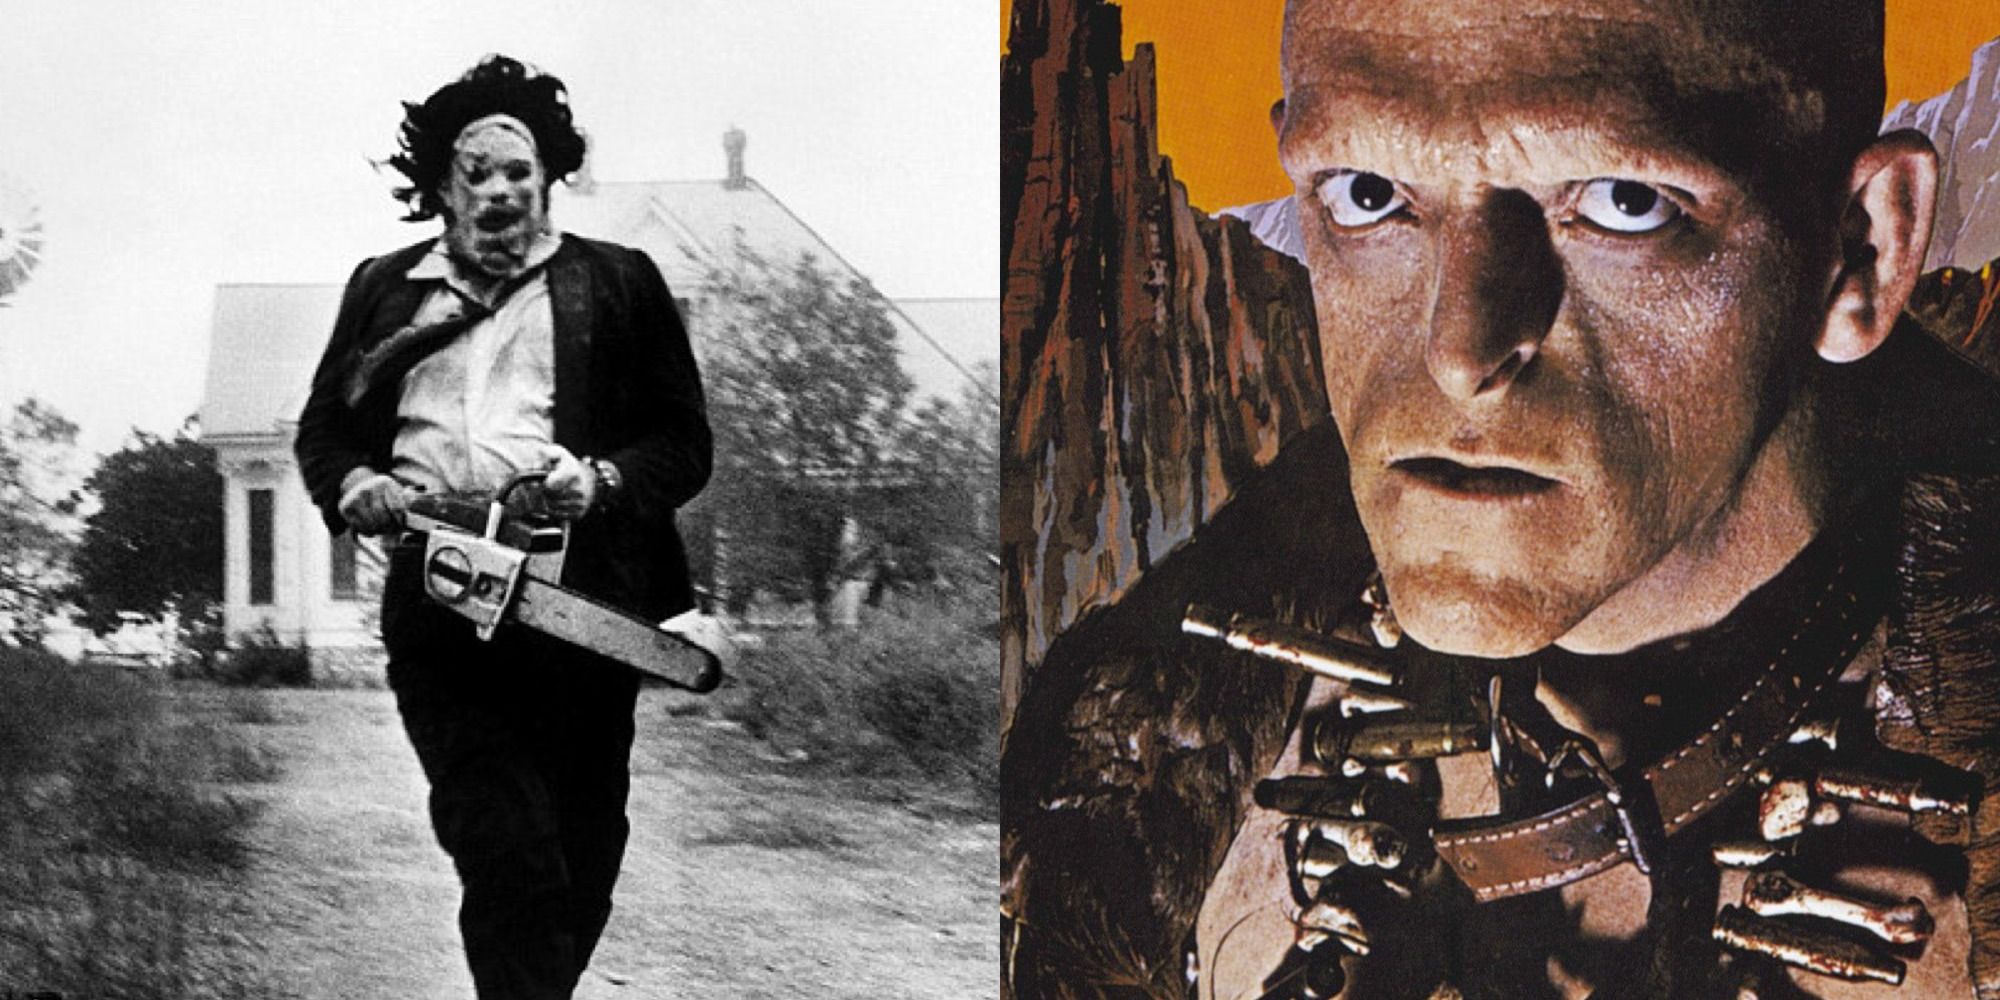 The Texas Chainsaw Massacre and Hills Have Eyes Mashup